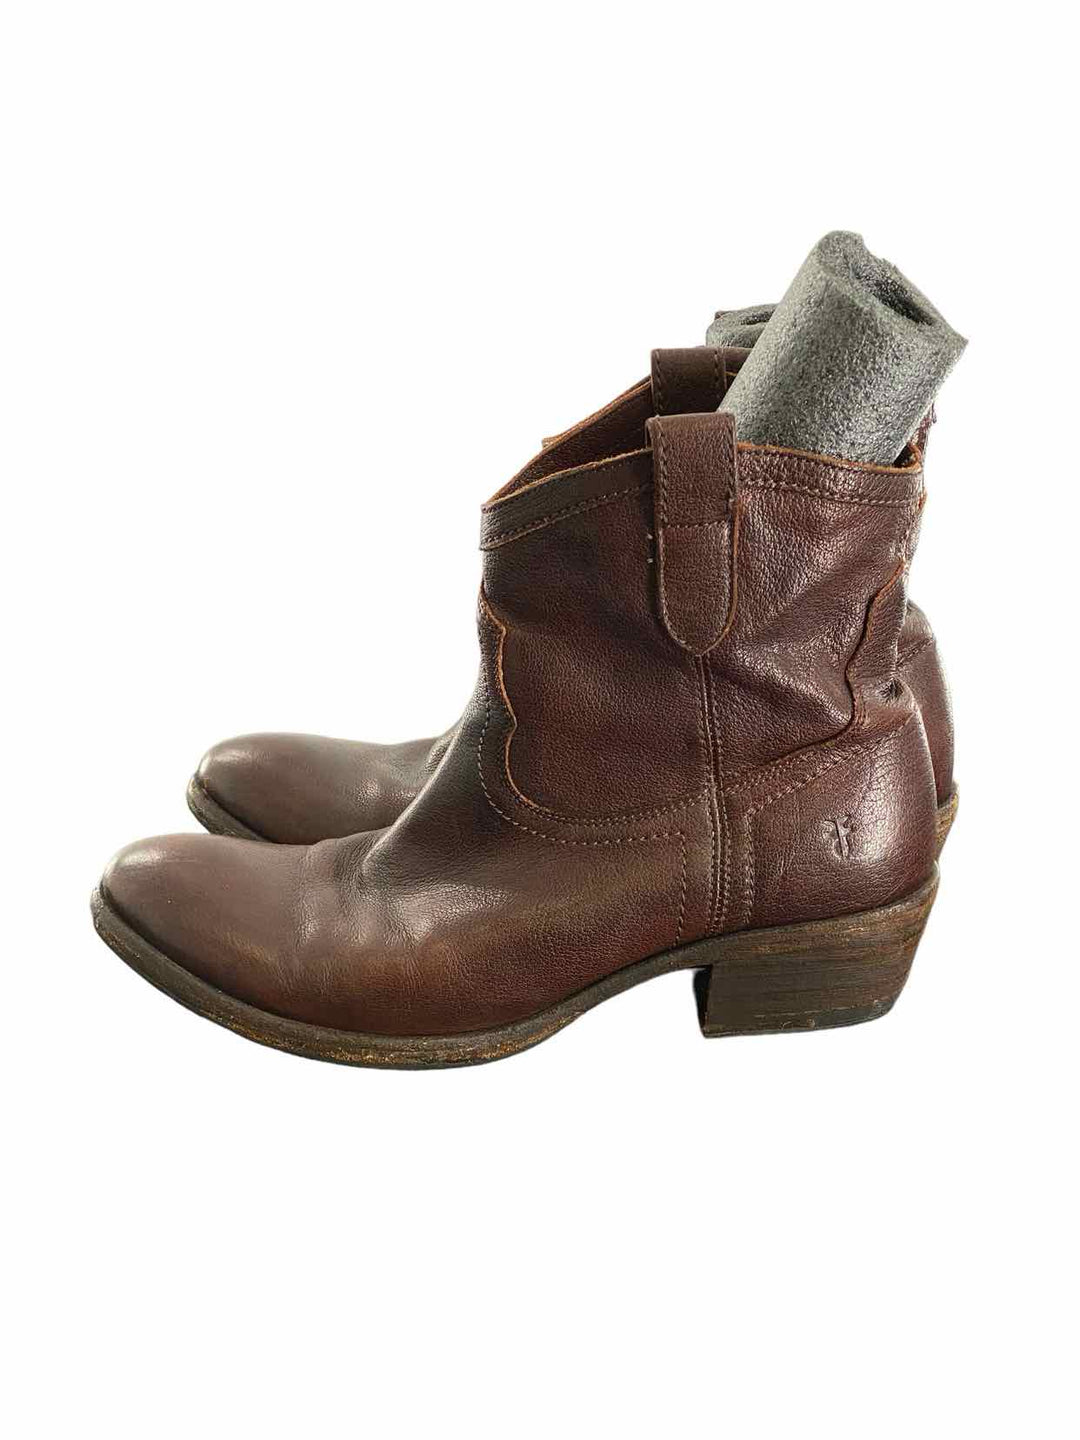 Frye Shoe Size 9 Brown Leather Boots(Ankle)